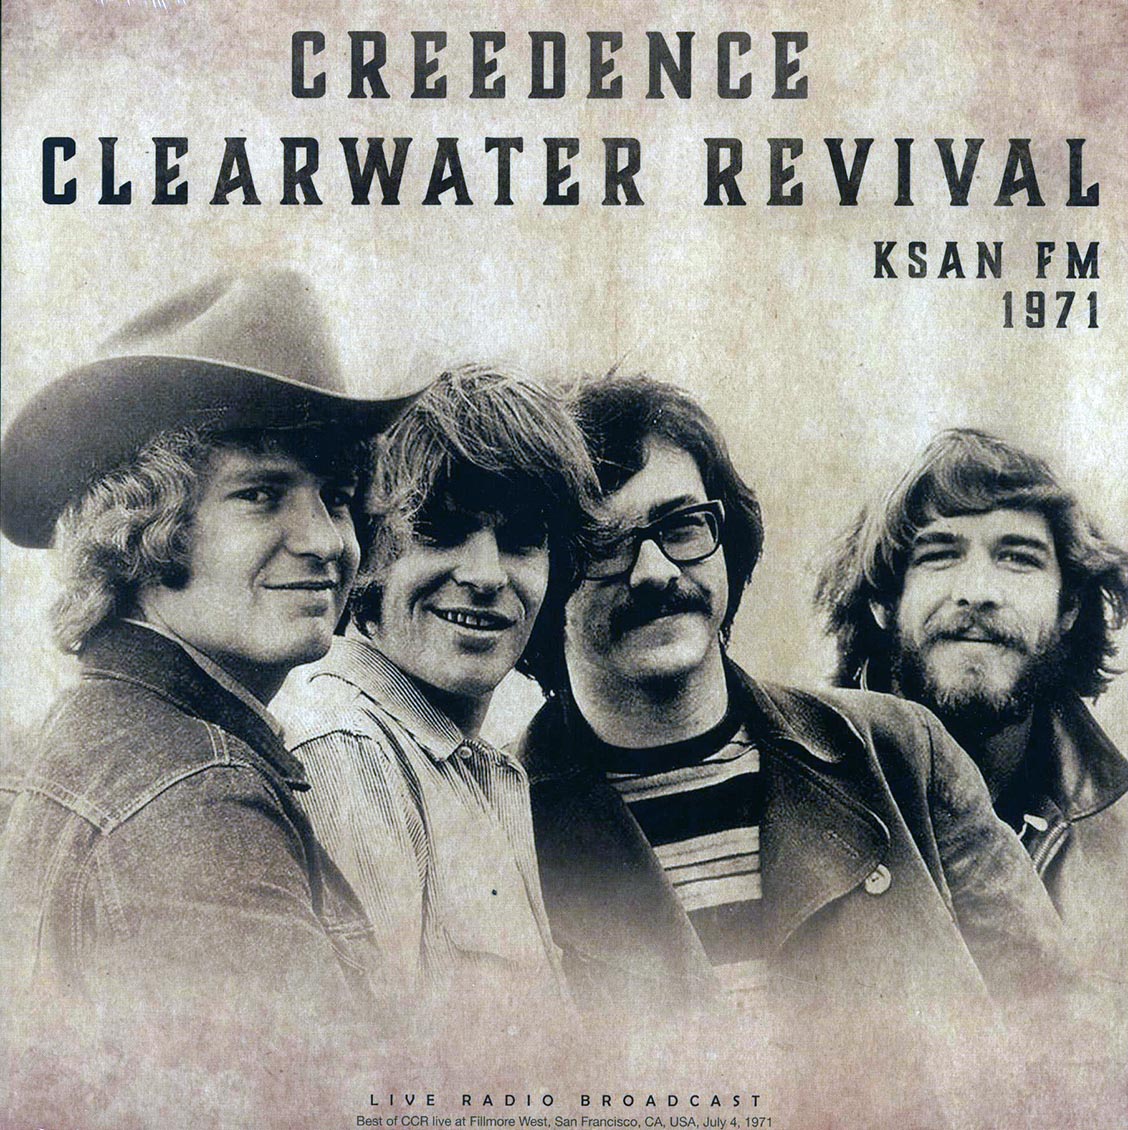 Creedence Clearwater Revival - KSAN FM 1971: Live At Fillmore West, San Francisco, July 4th - Vinyl LP